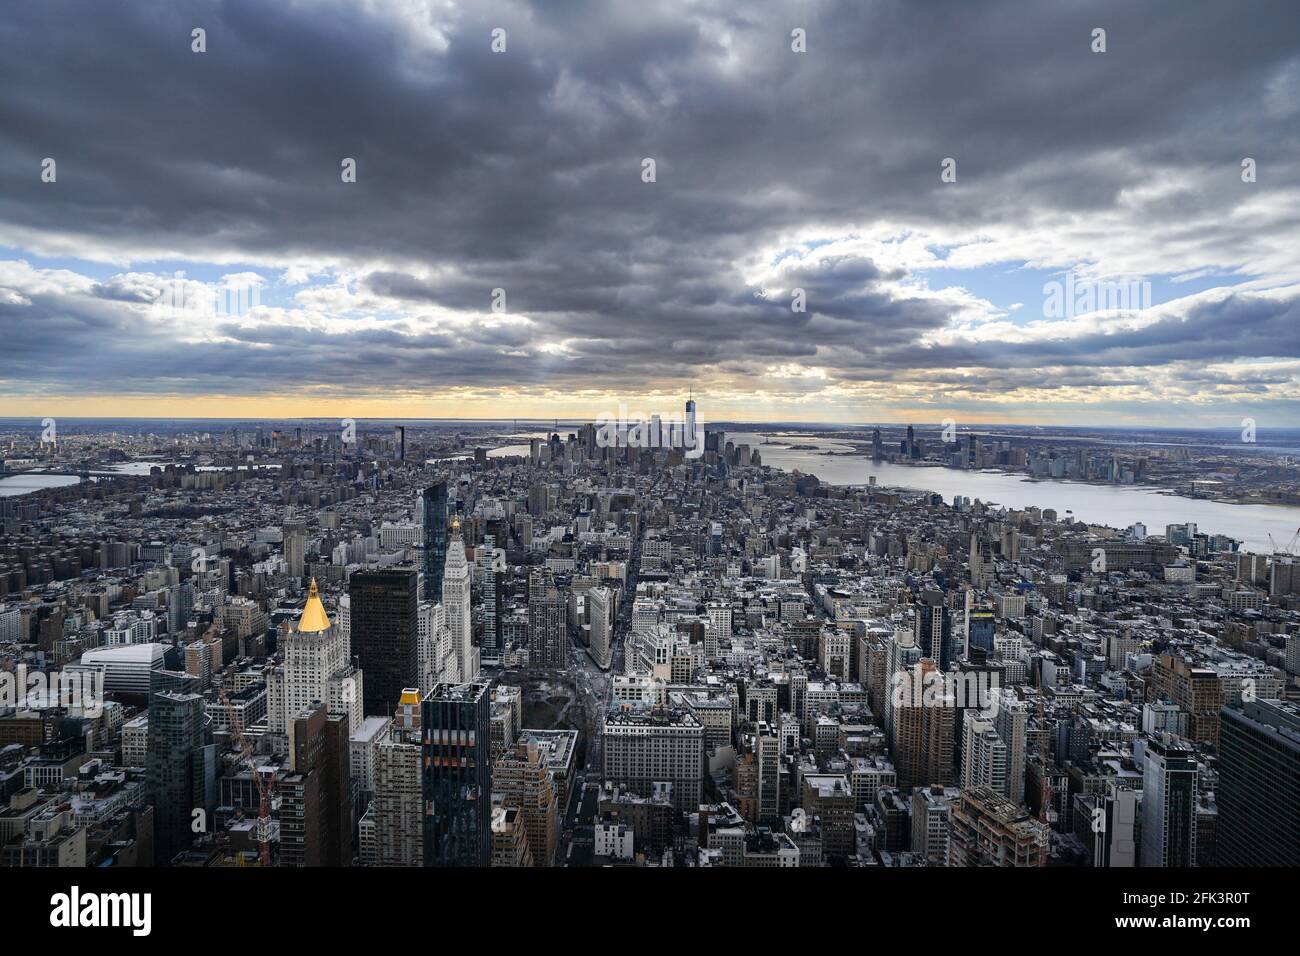 Travel USA: Manhattan as seen from the Empire State Building towards The Battery under a low hanging winter sky Stock Photo